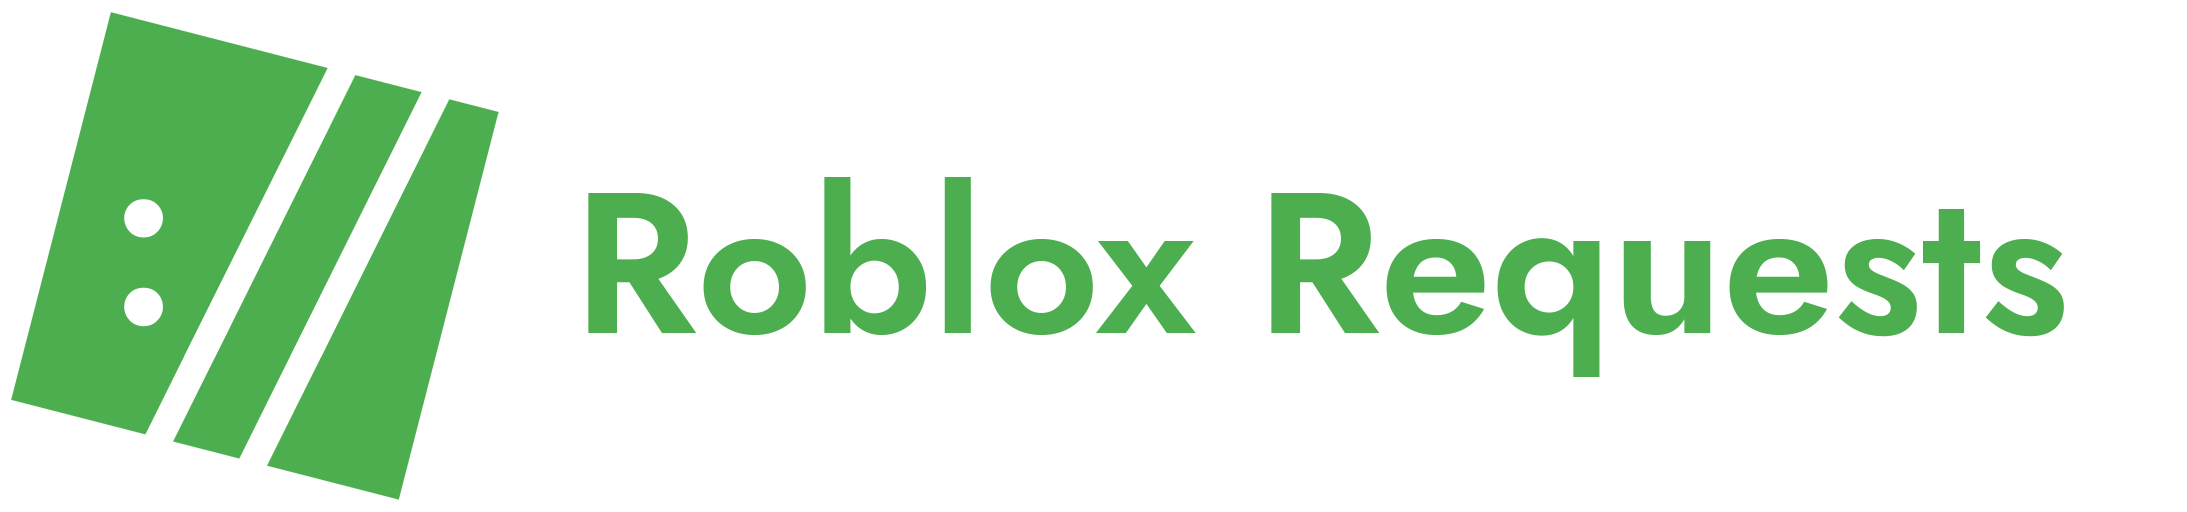 Roblox Requests